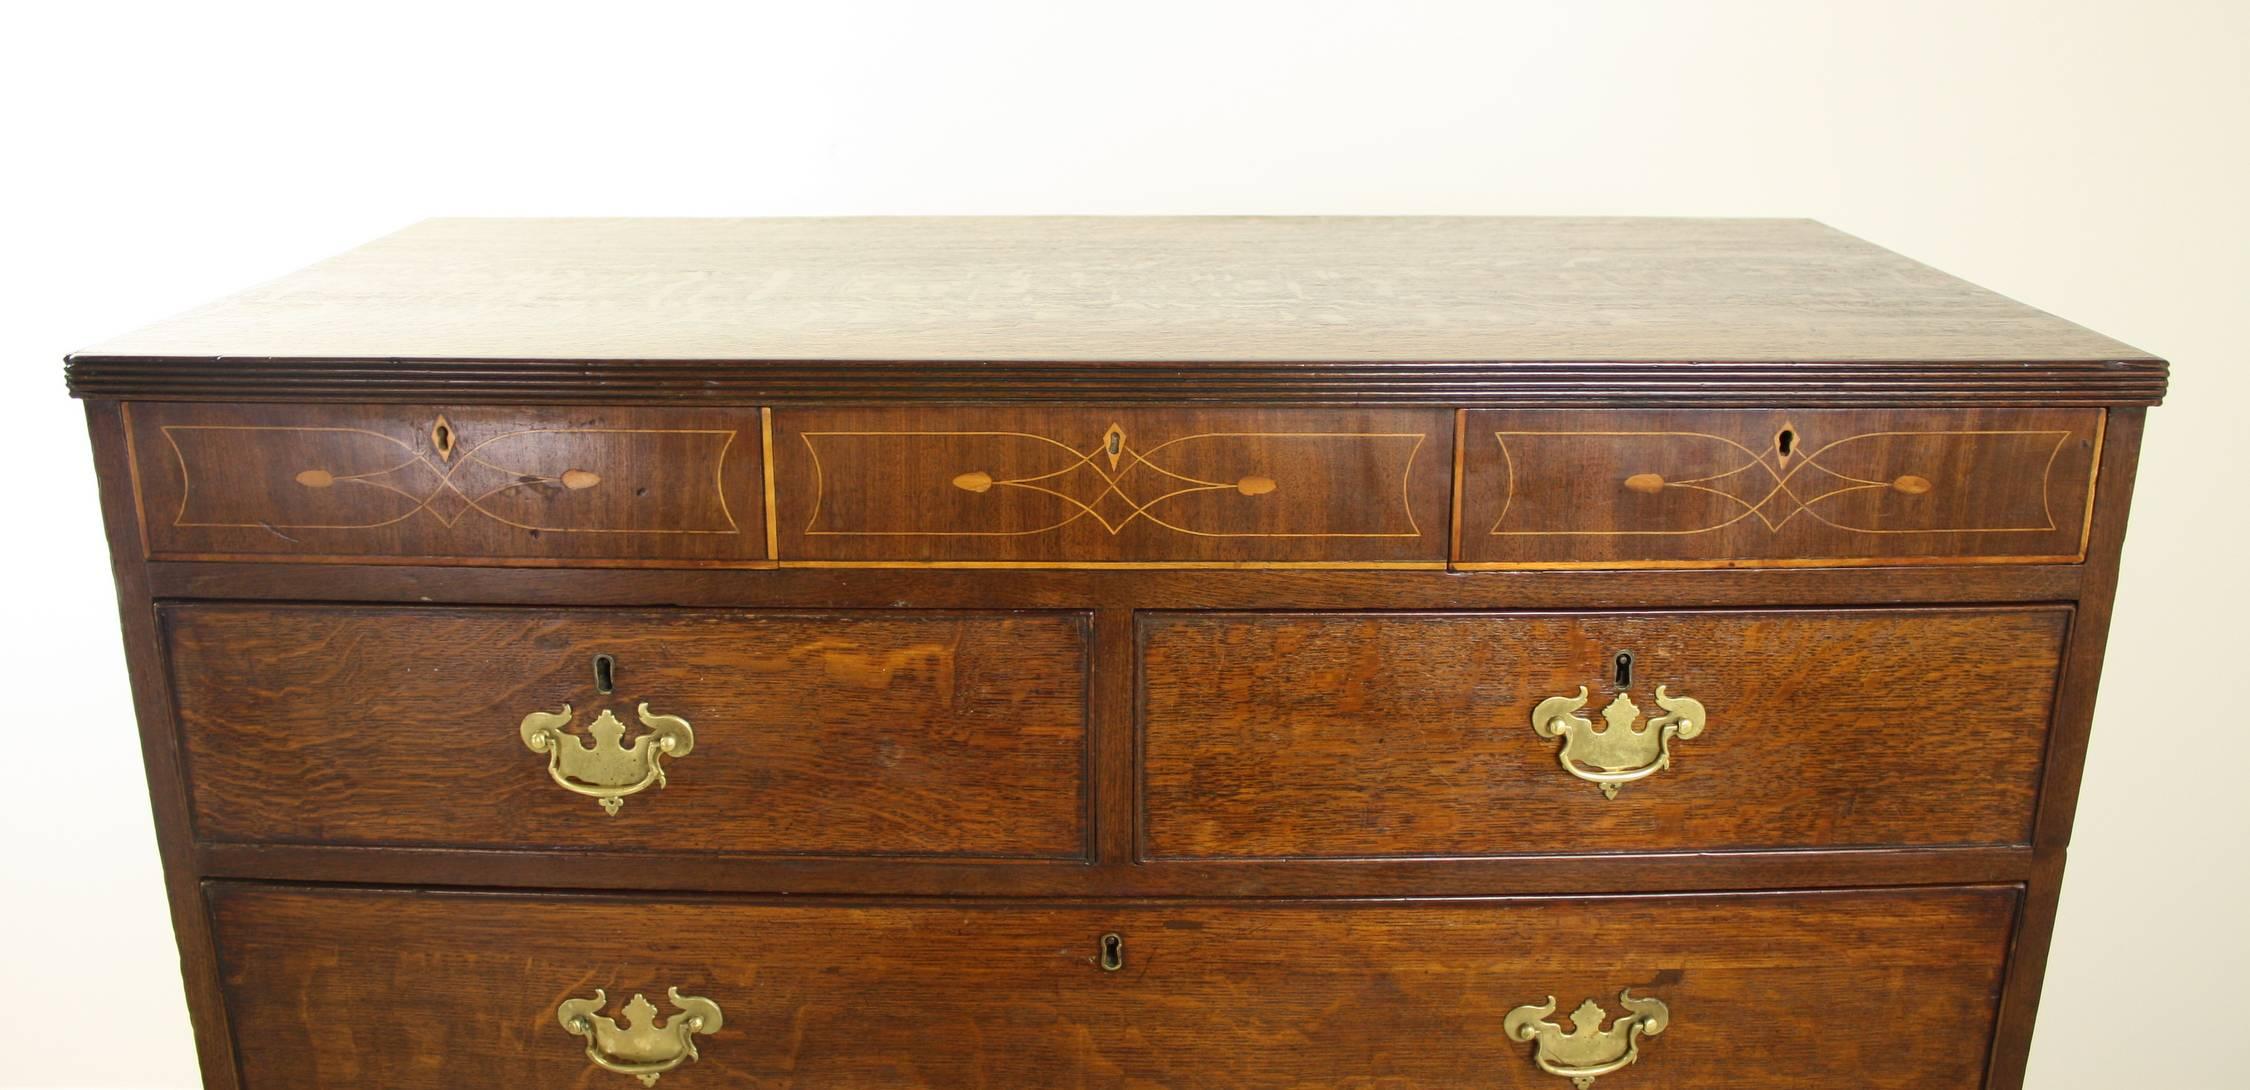 English Formal Georgian Oak Chest of Drawers with Satinwood Inlay